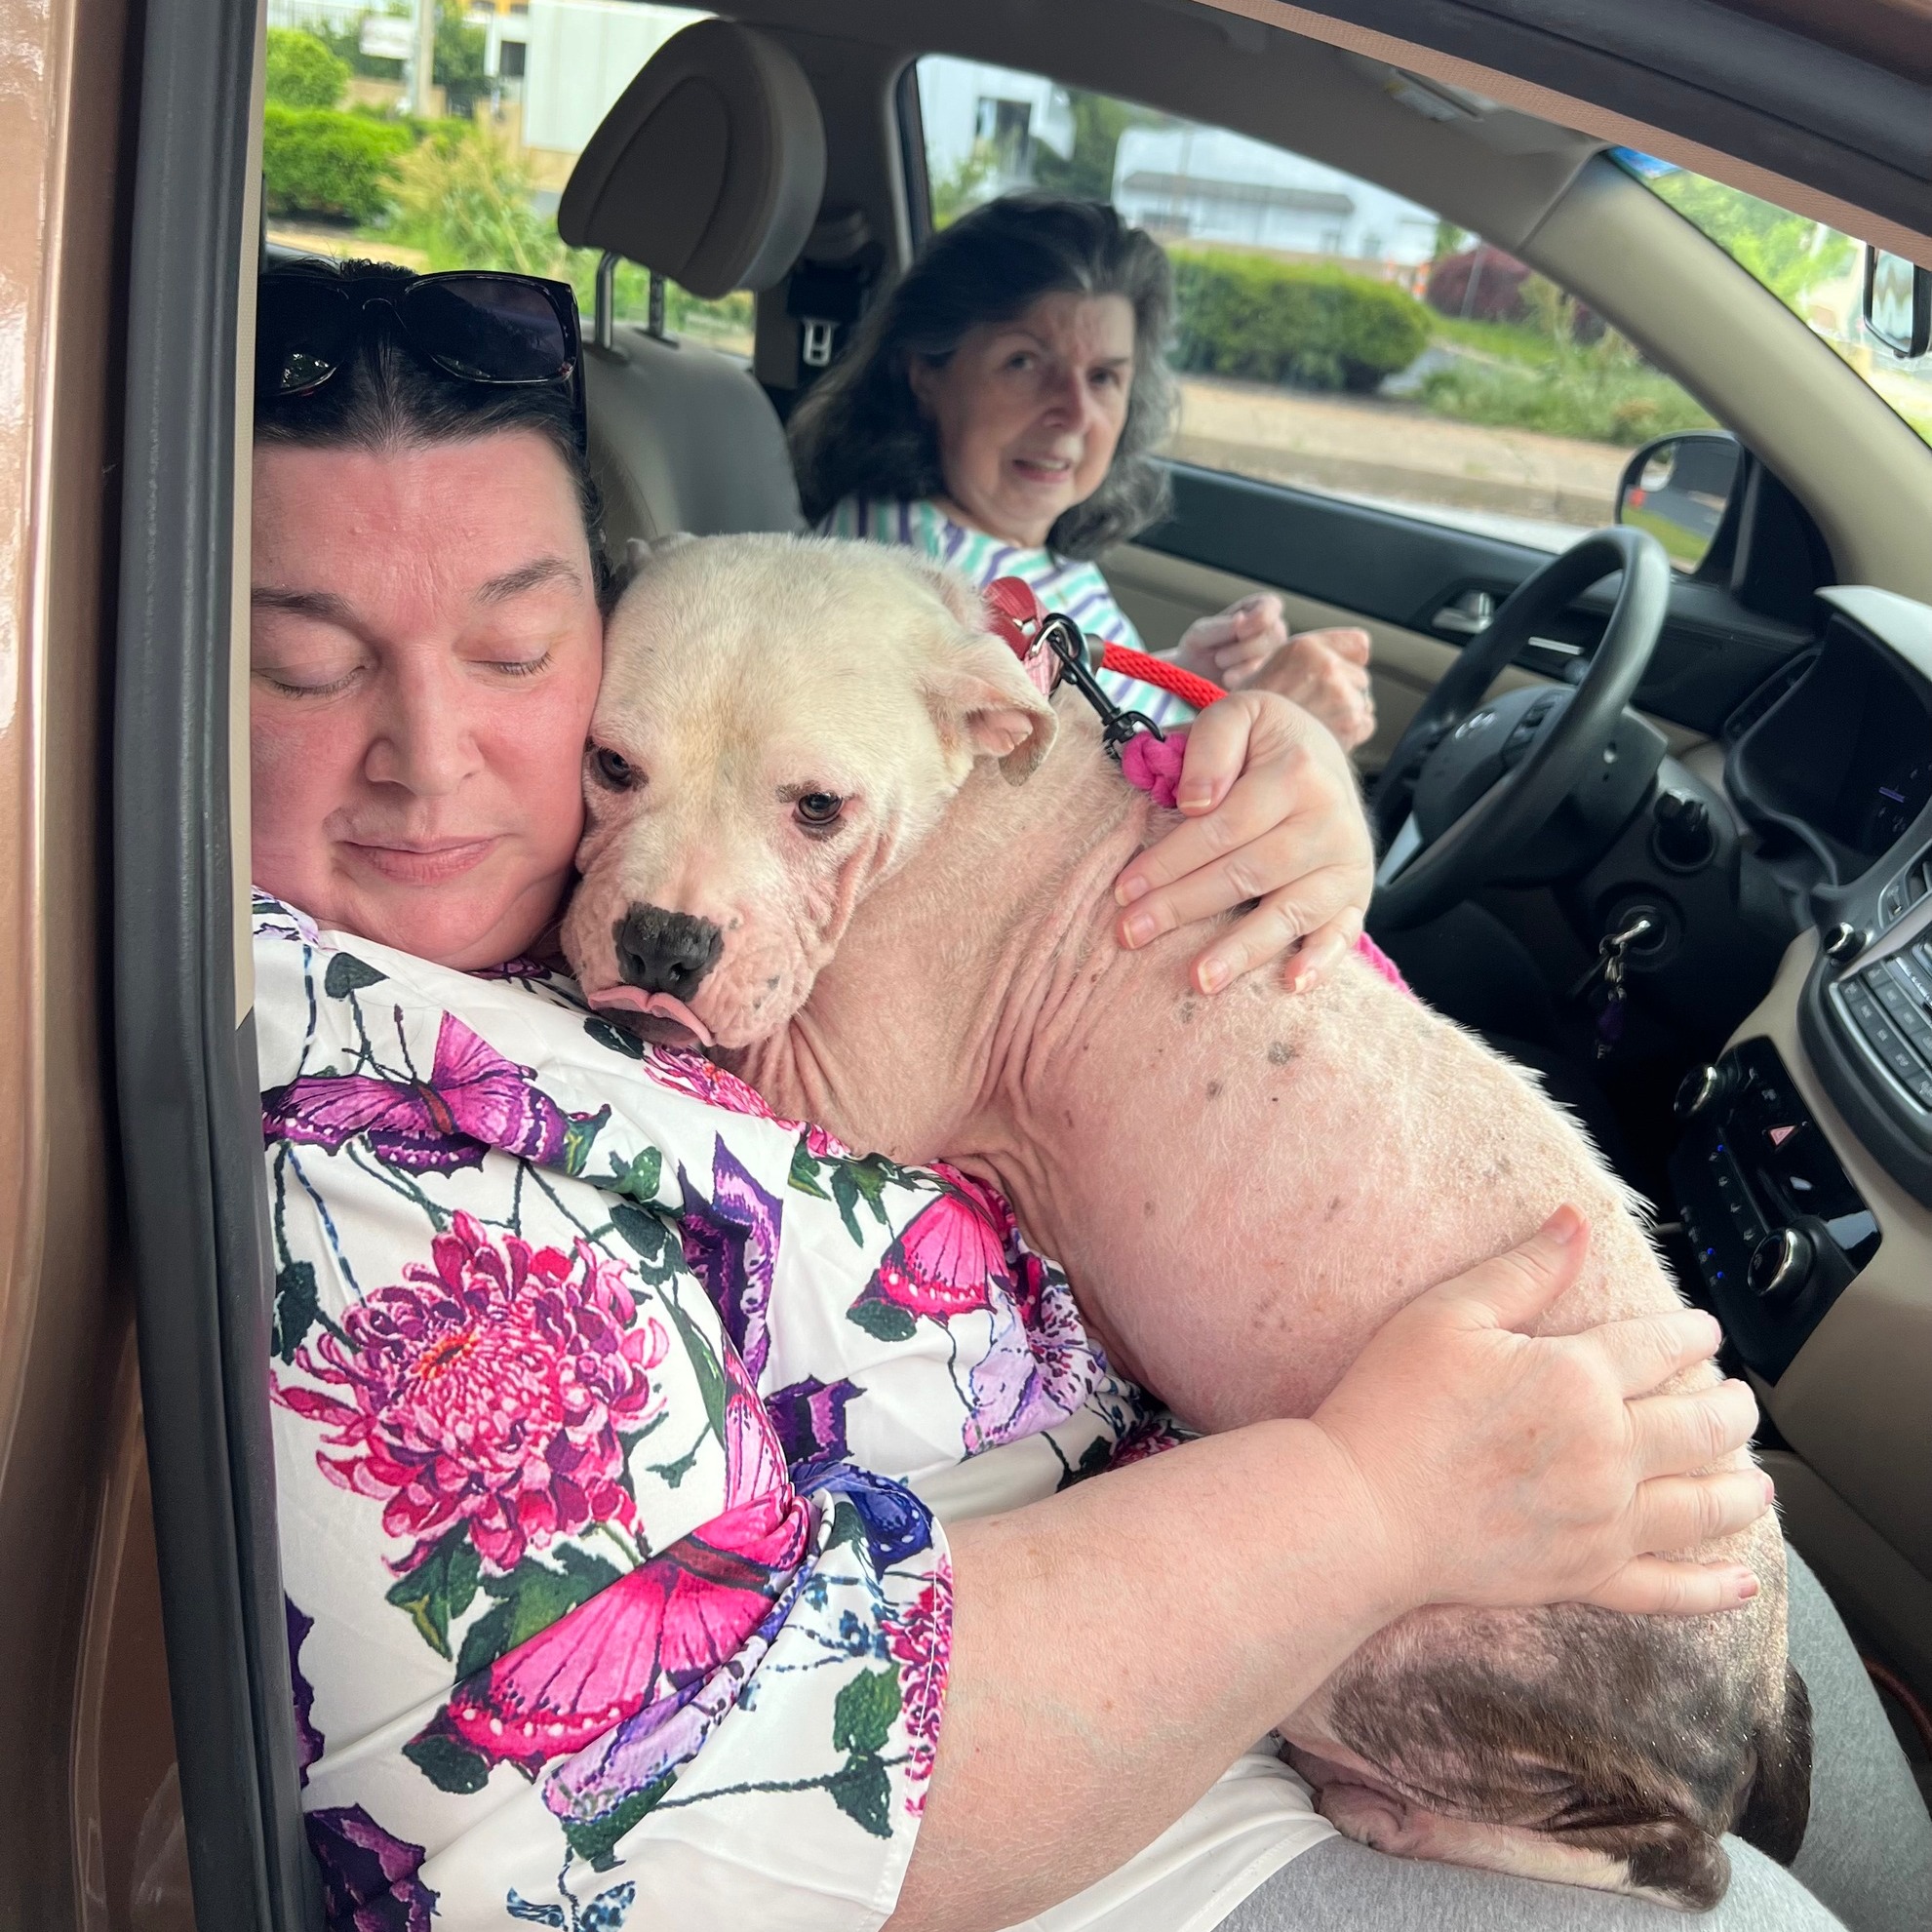 woman sitting in a car holding a dog